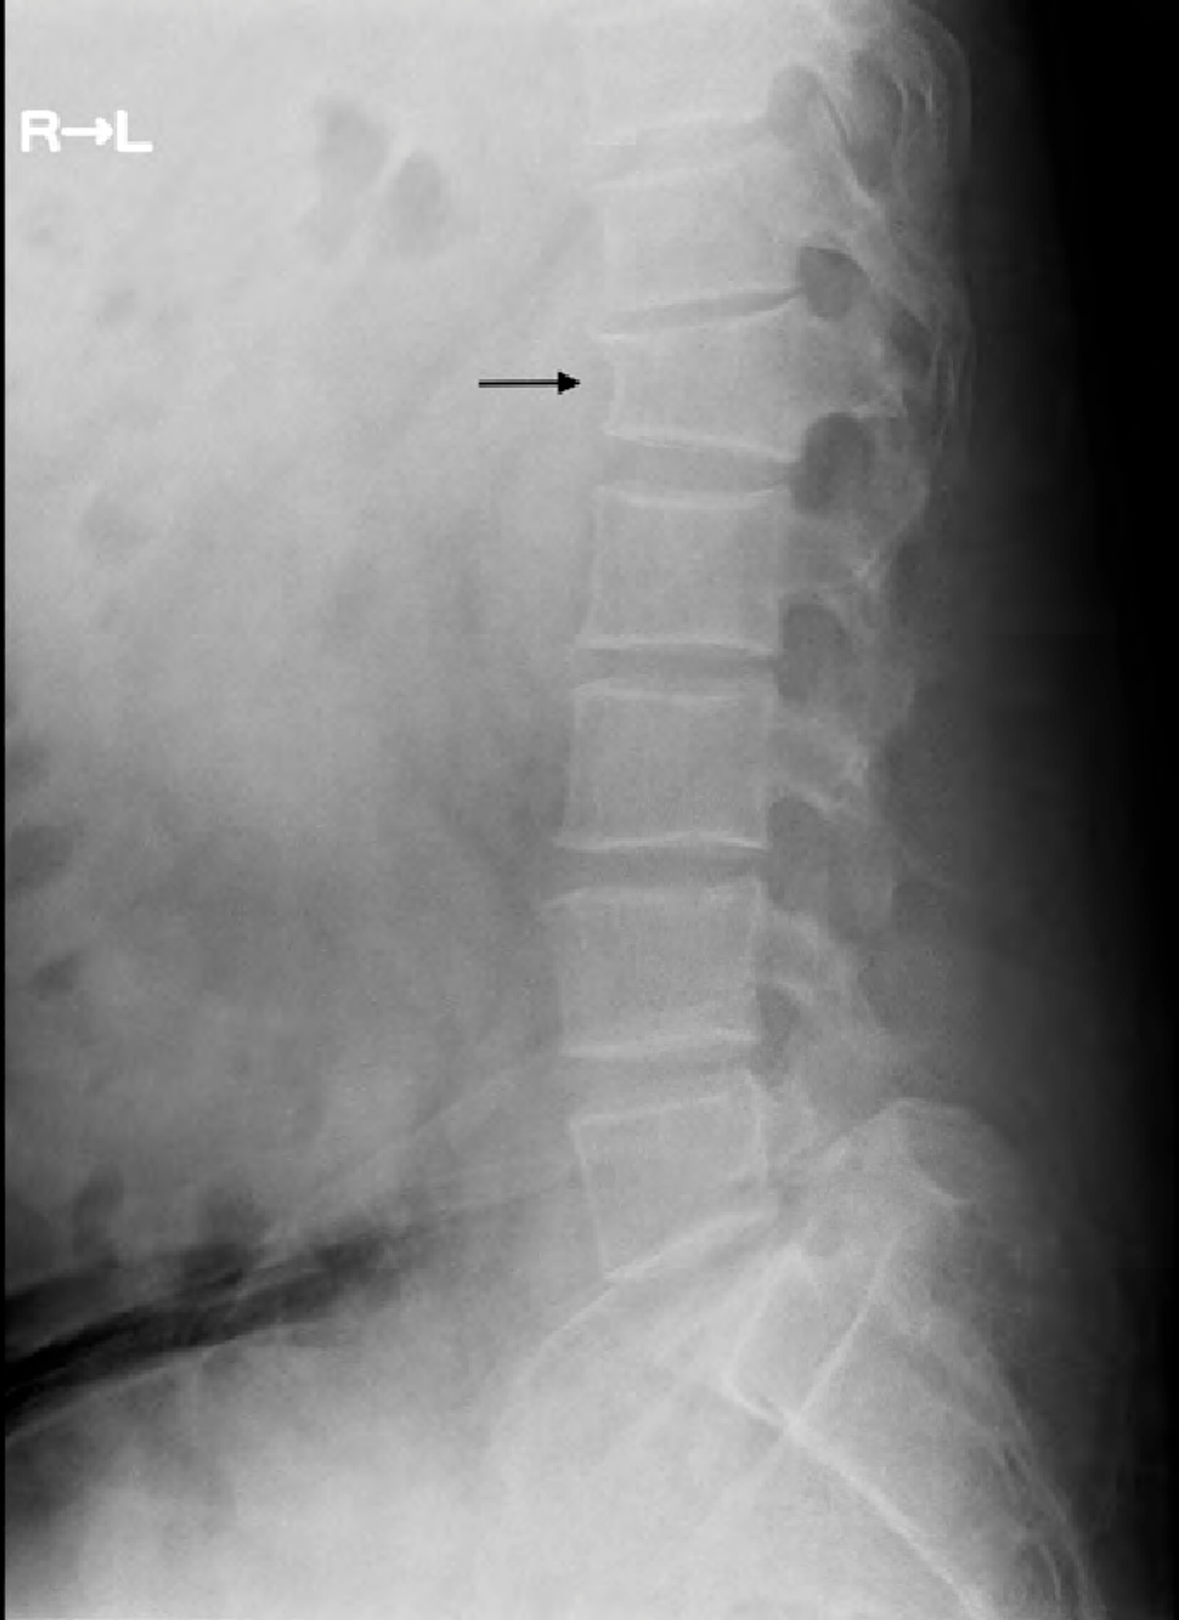 x-ray, compression fracture